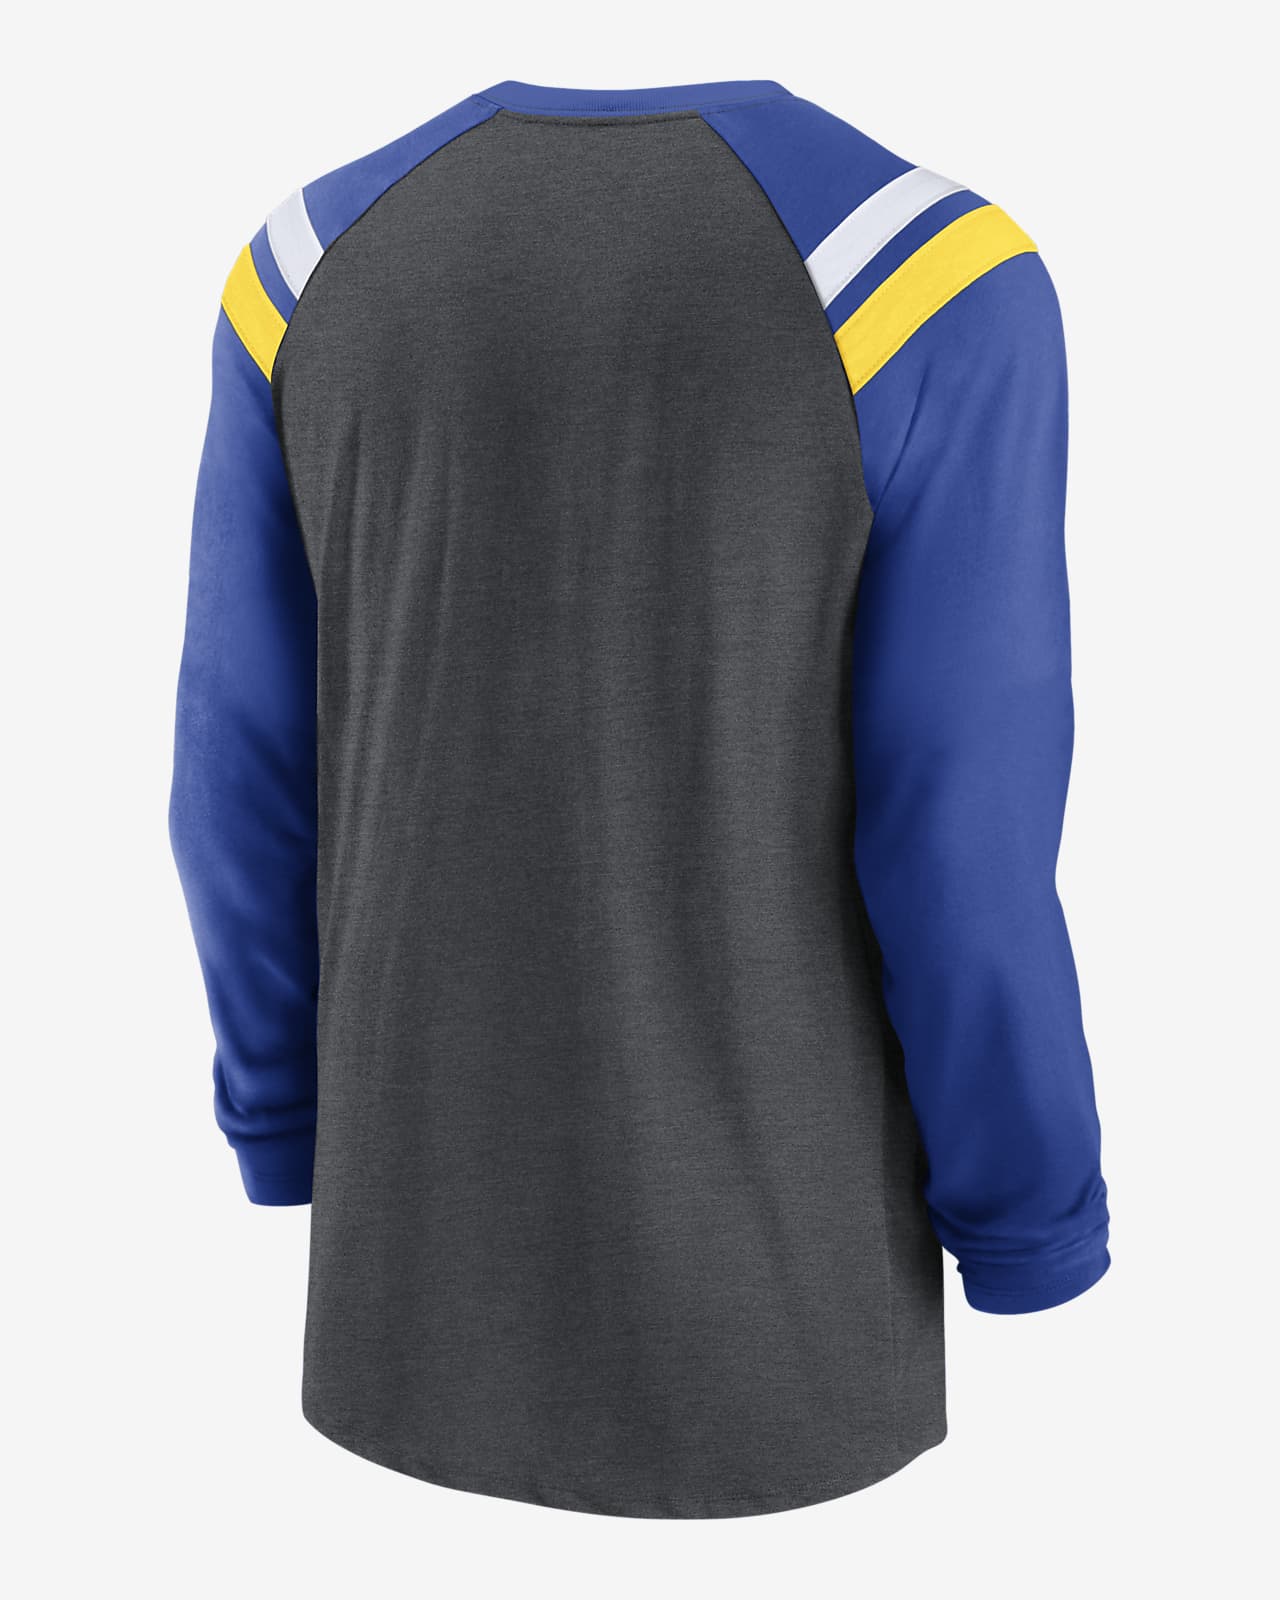  Team Fan Apparel NFL Gameday Adult Long Sleeve Shirt,  Lightweight Tagless Long Sleeve T-Shirt with Side Vent Construction (Los  Angeles Rams - Blue, Adult Small) : Sports & Outdoors